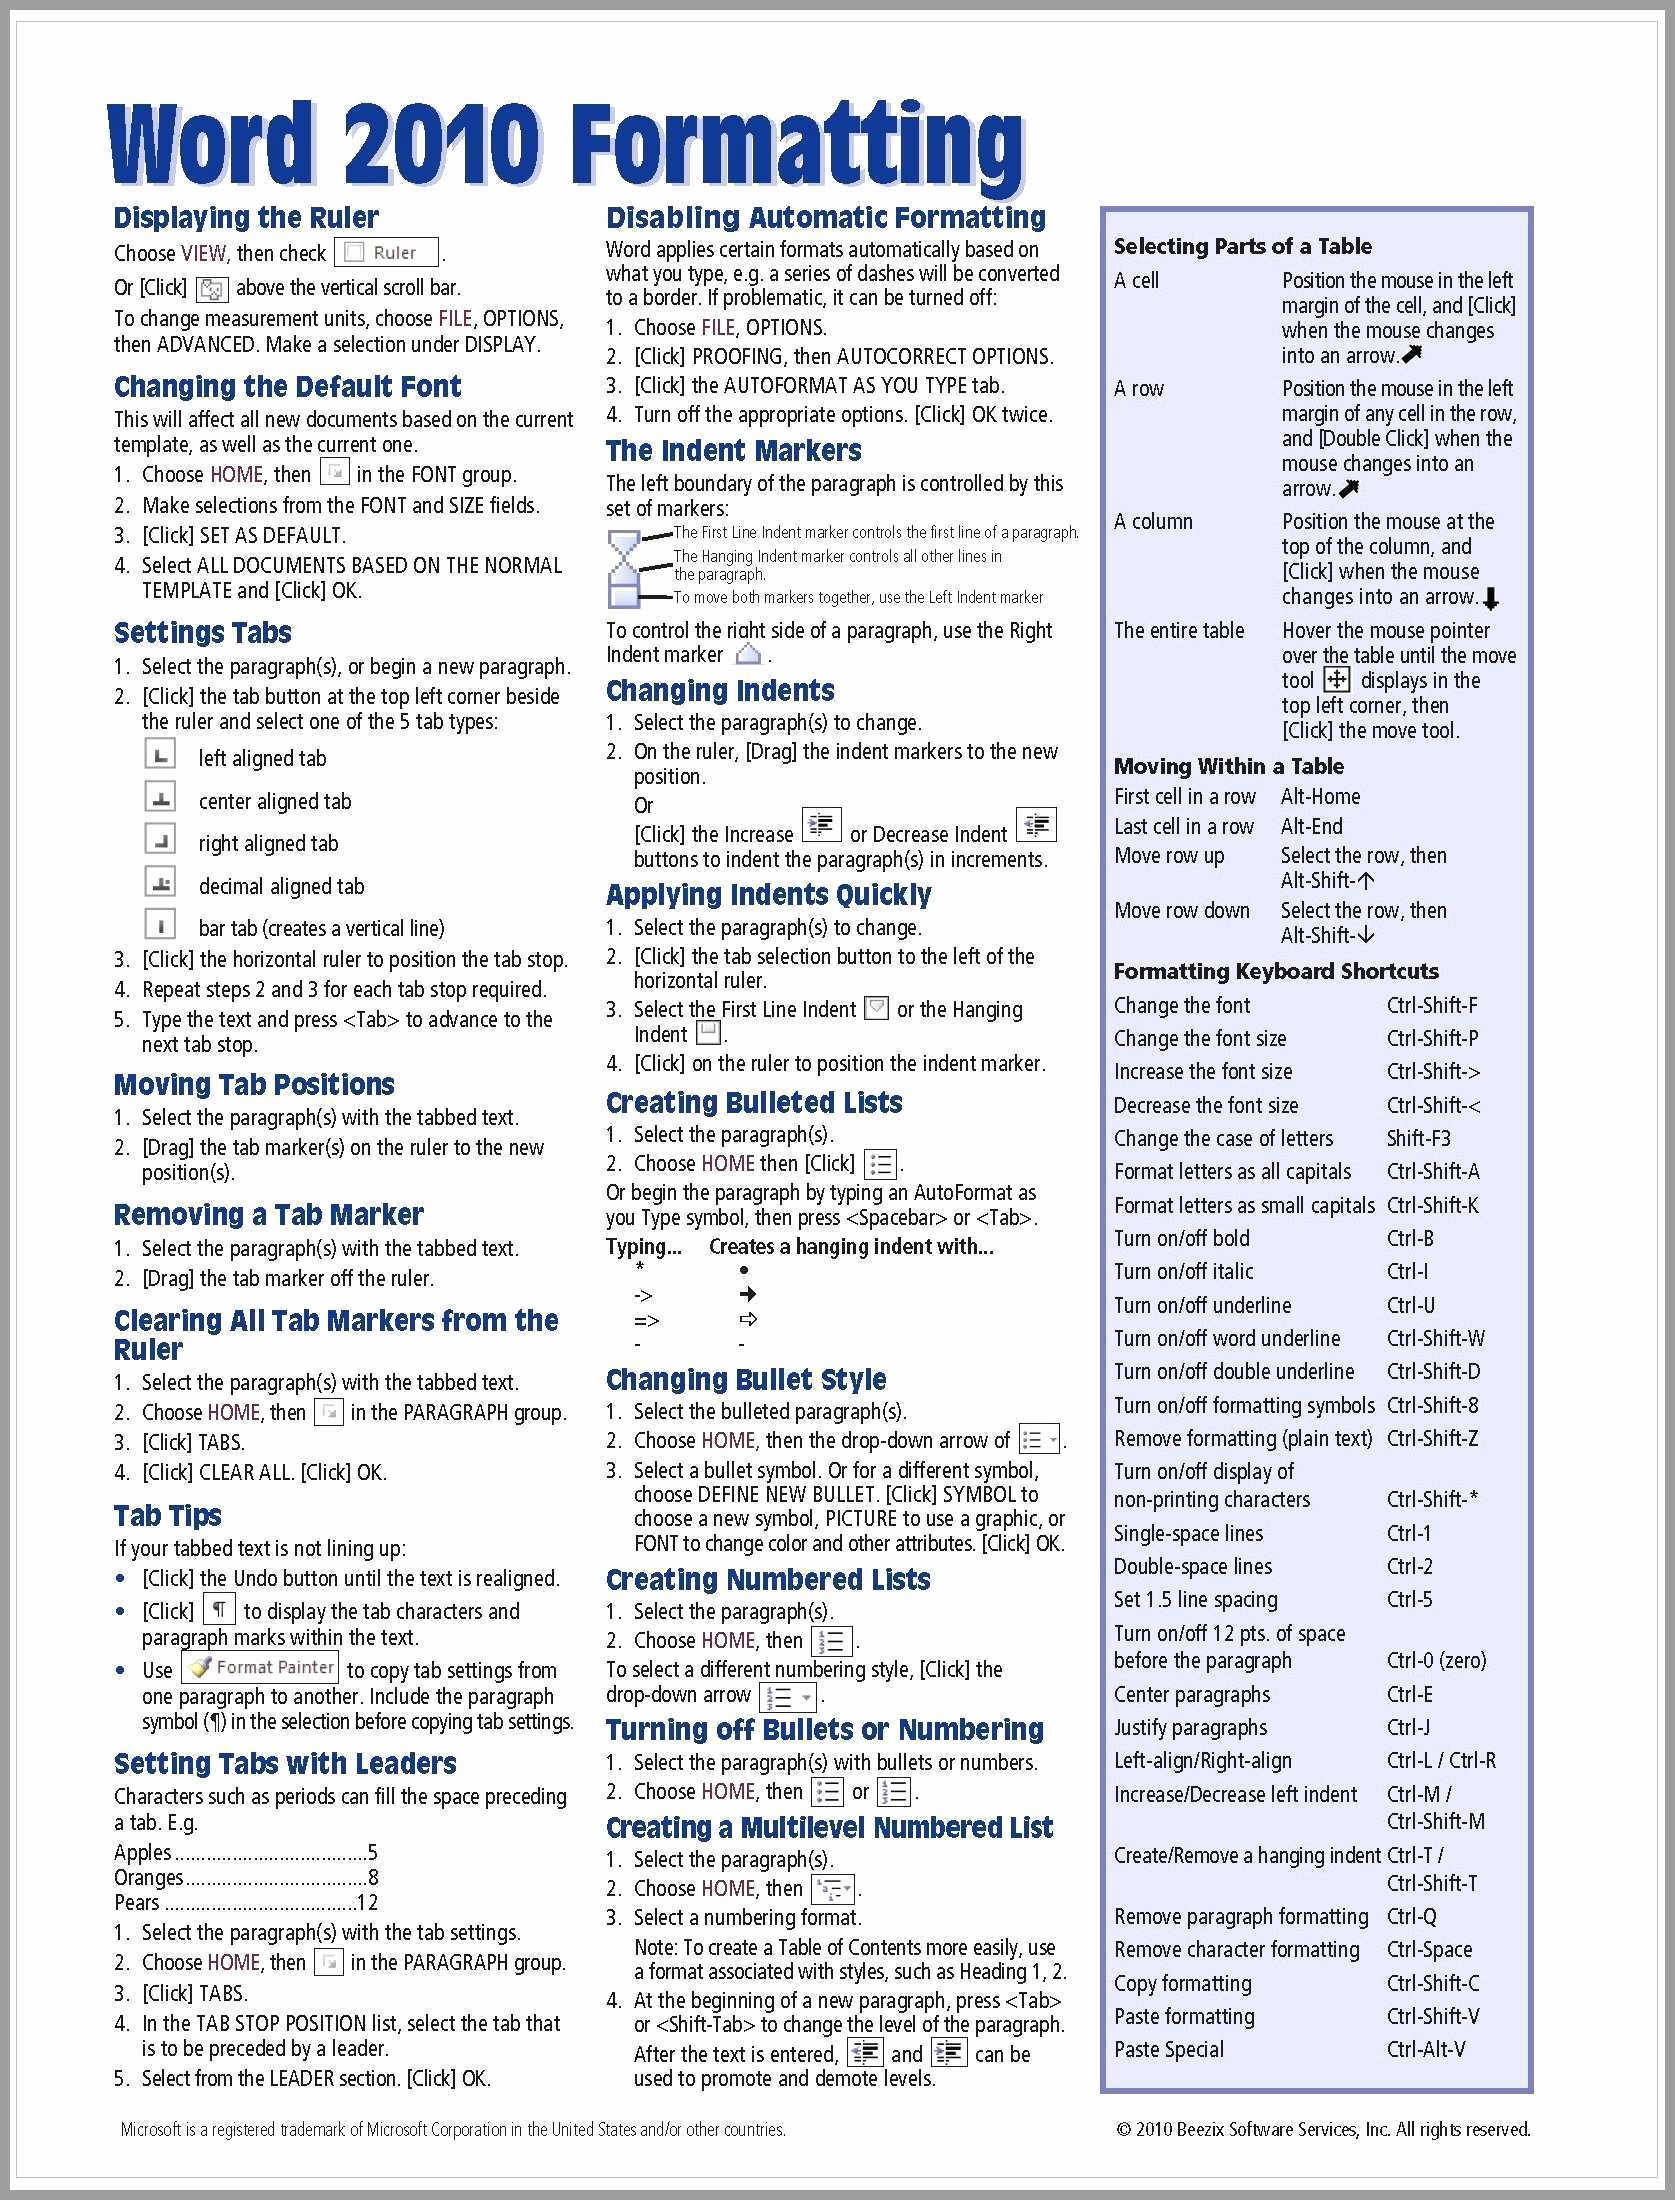 Resumes On Microsoft Word 2010 Fresh 66 Unique Resume Layout for Microsoft Word 2010